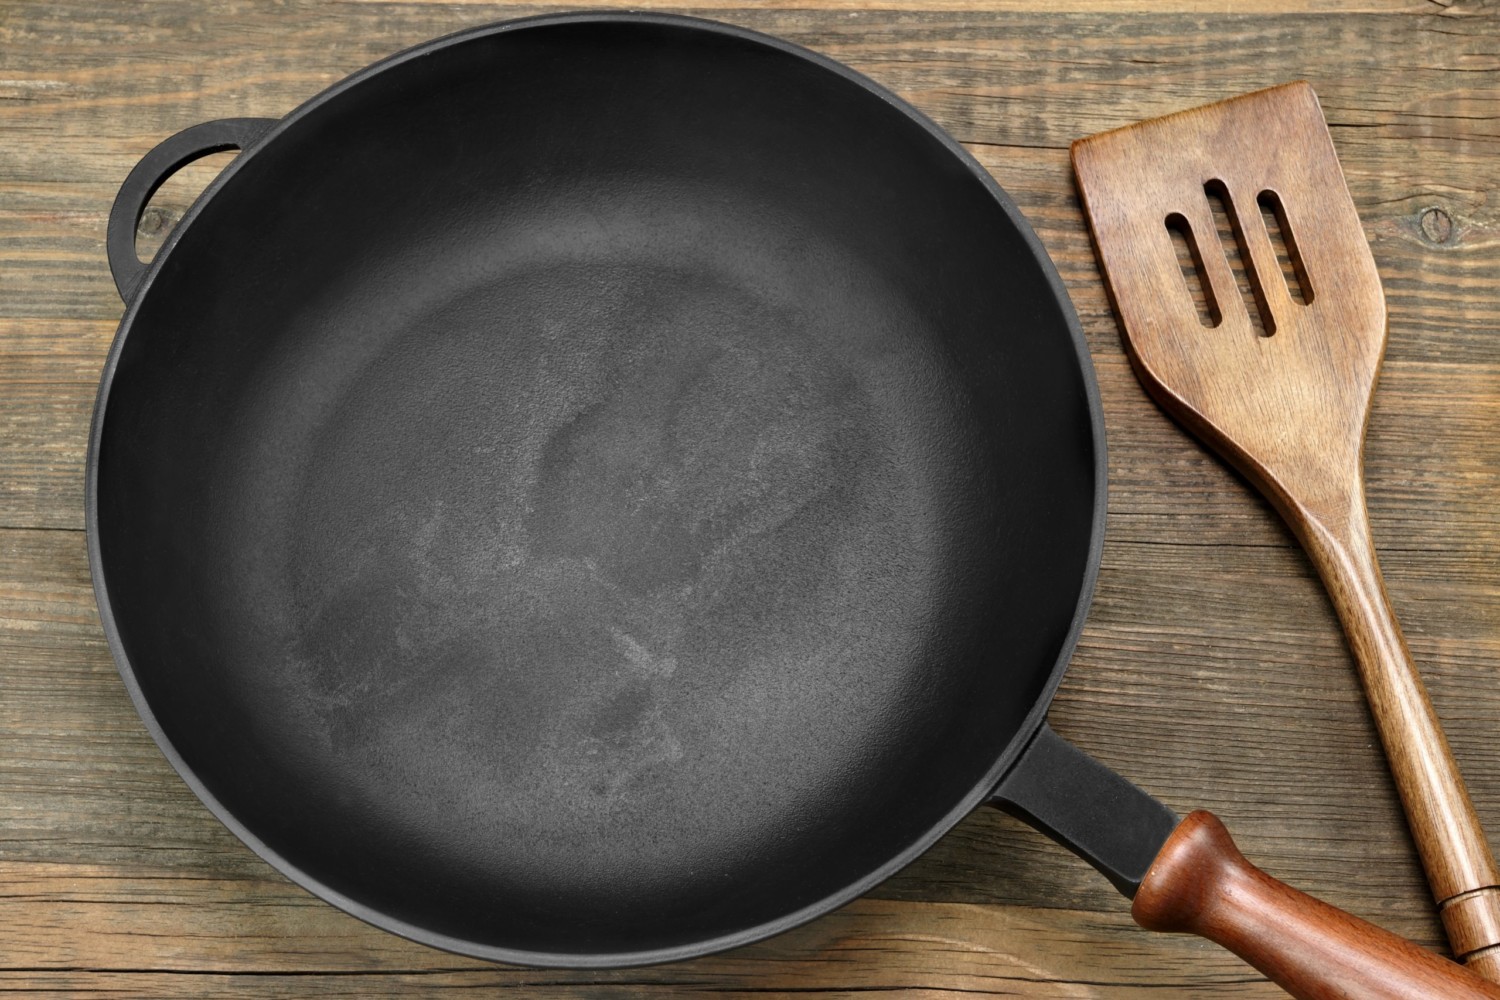 remove rust from cast iron